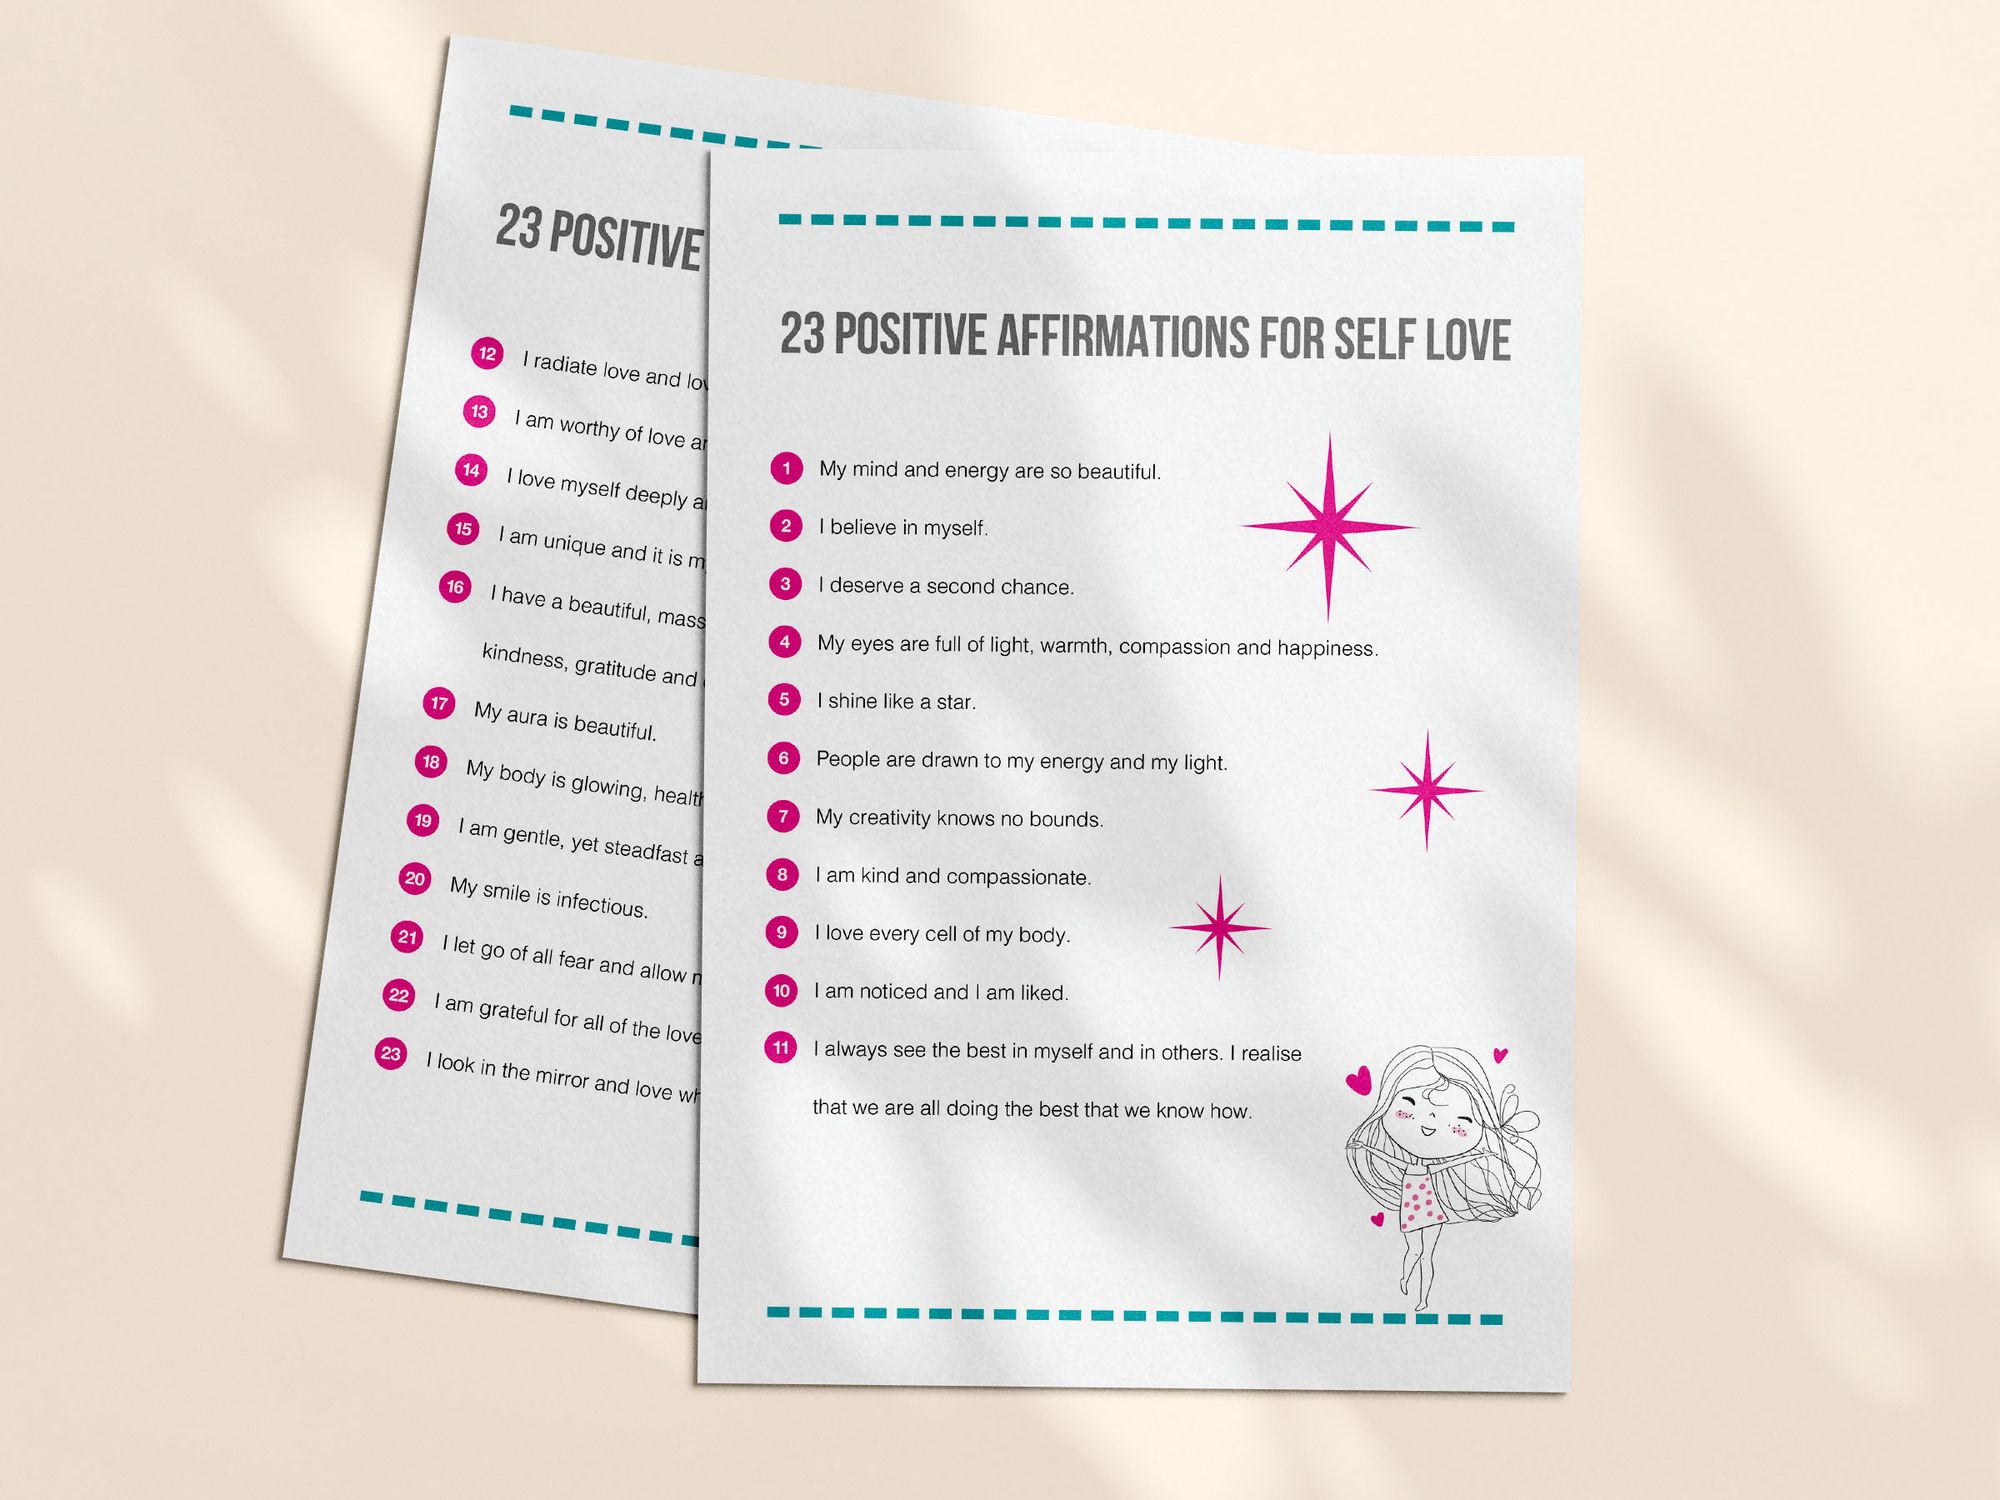 23 printable self love affirmations - download the PDF and print at home.